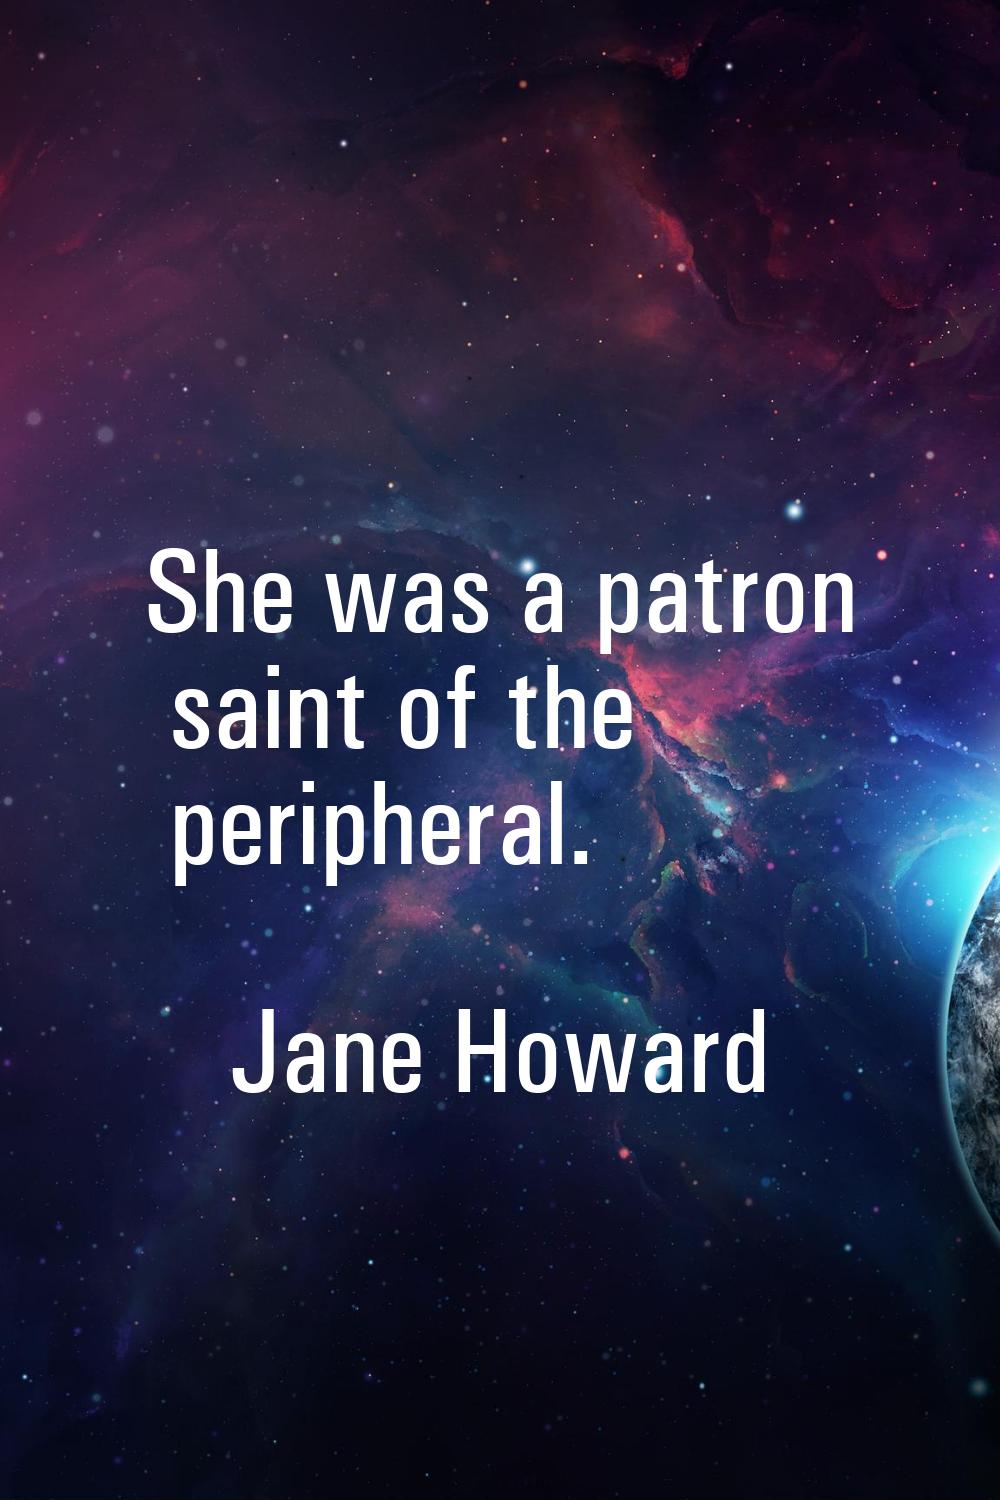 She was a patron saint of the peripheral.